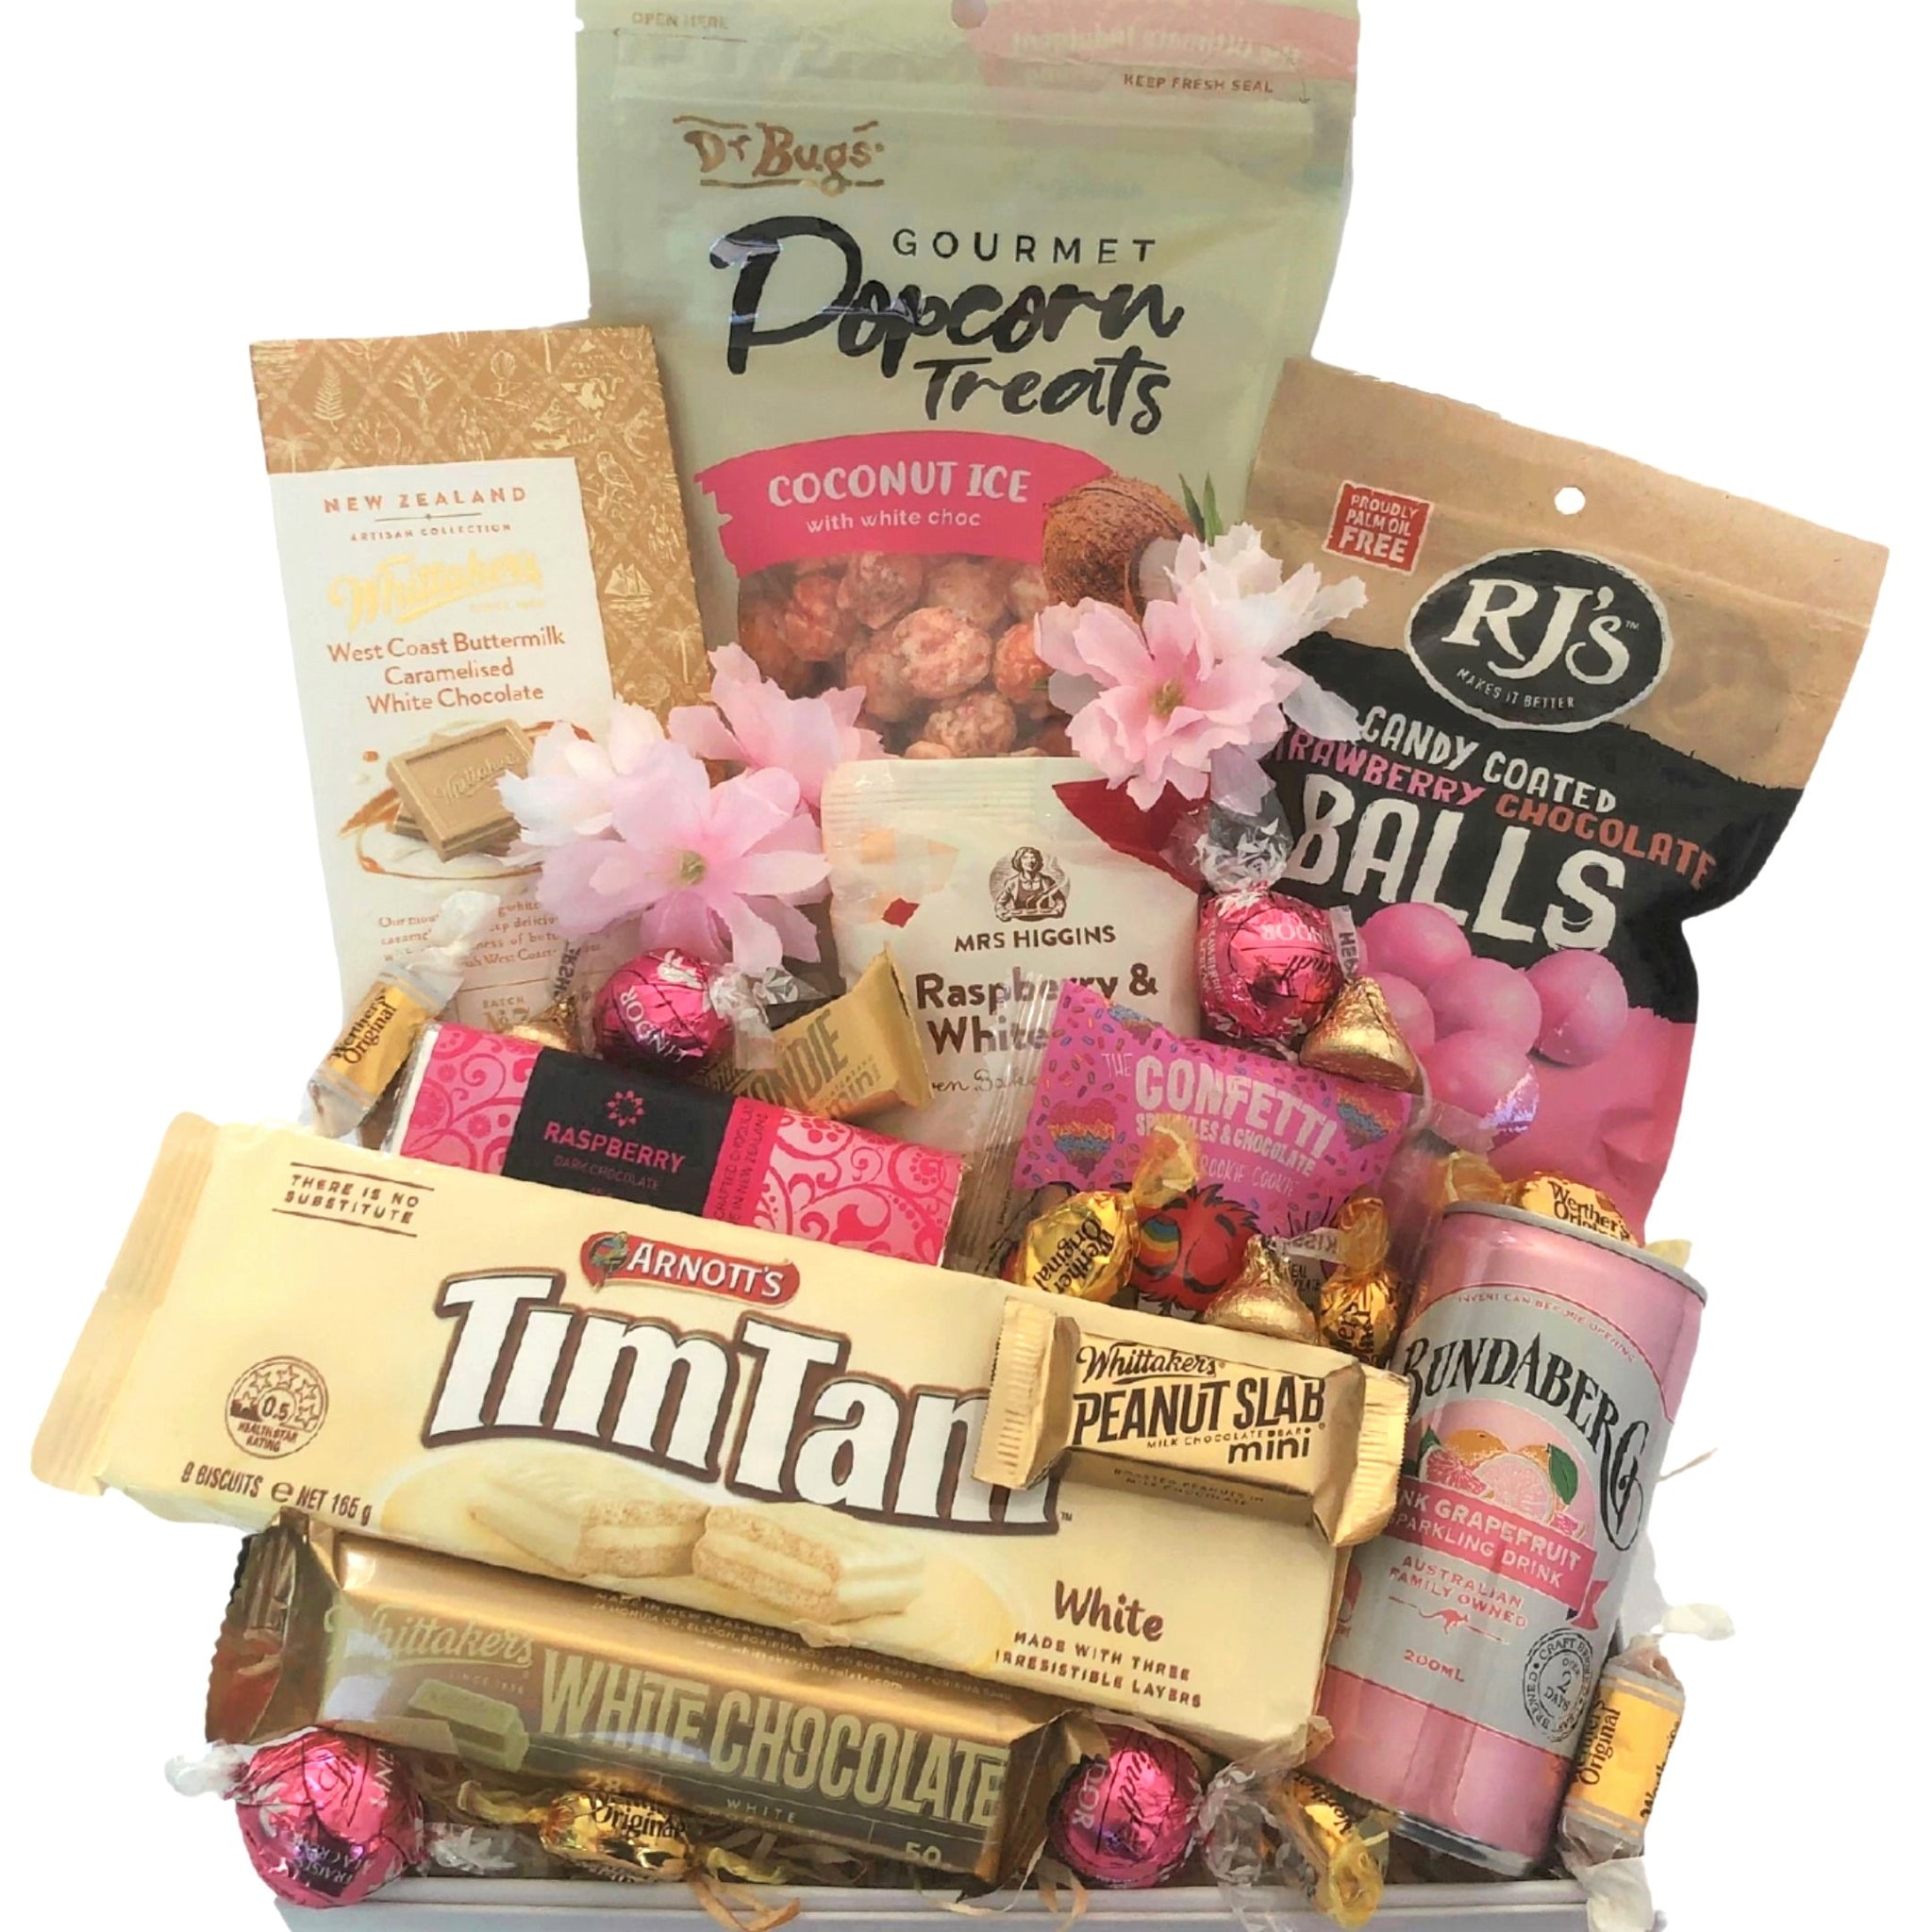 This pretty in pink gift box is filled with sweet treats that would be sure to make anyone’s day! Whittaker’s artisan block caramelised buttermilk white chocolate x1 Chocolate traders dark chocolate raspberry bar x1 Dr Bugs gourmet coconut ice popcorn x1 RJ’S chocolate balls x1 White chocolate Tim Tam’s Mrs Higgins raspberry and white chocolate cookie x1 Bundaberg grapefruit can x1 Cookie time confetti cookie x1 Whittaker’s white chocolate bar x1 Lindt strawberry truffle balls x4